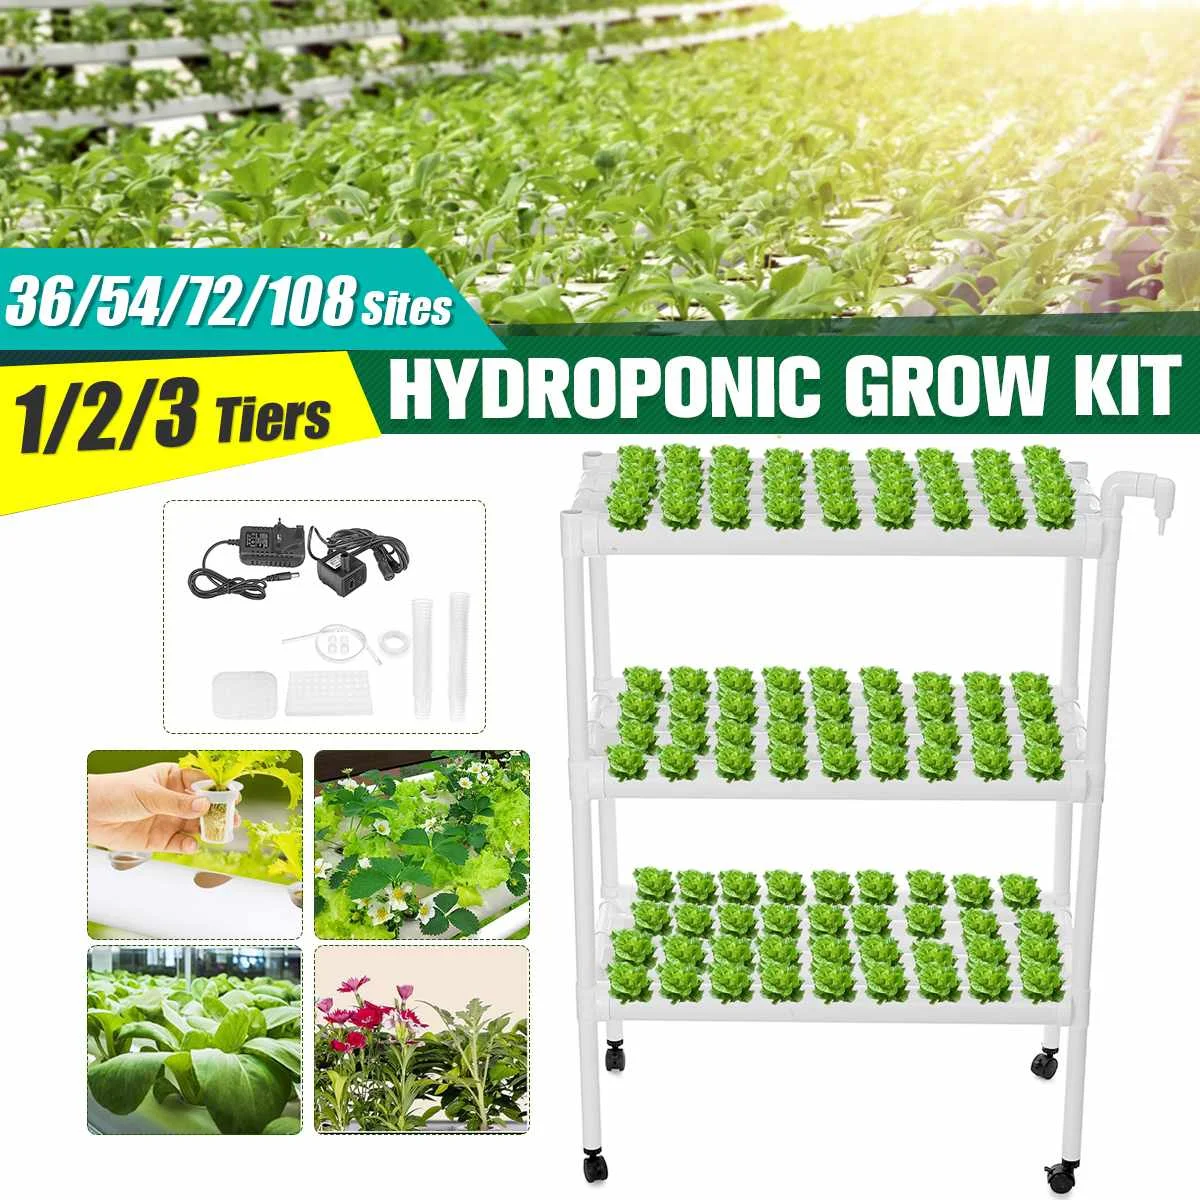 

108 Planting Sites 3 Layers Horizontal Hydroponic Grow Kit Garden Plant Vegetable Planting Grow Box Deep Water Culture System